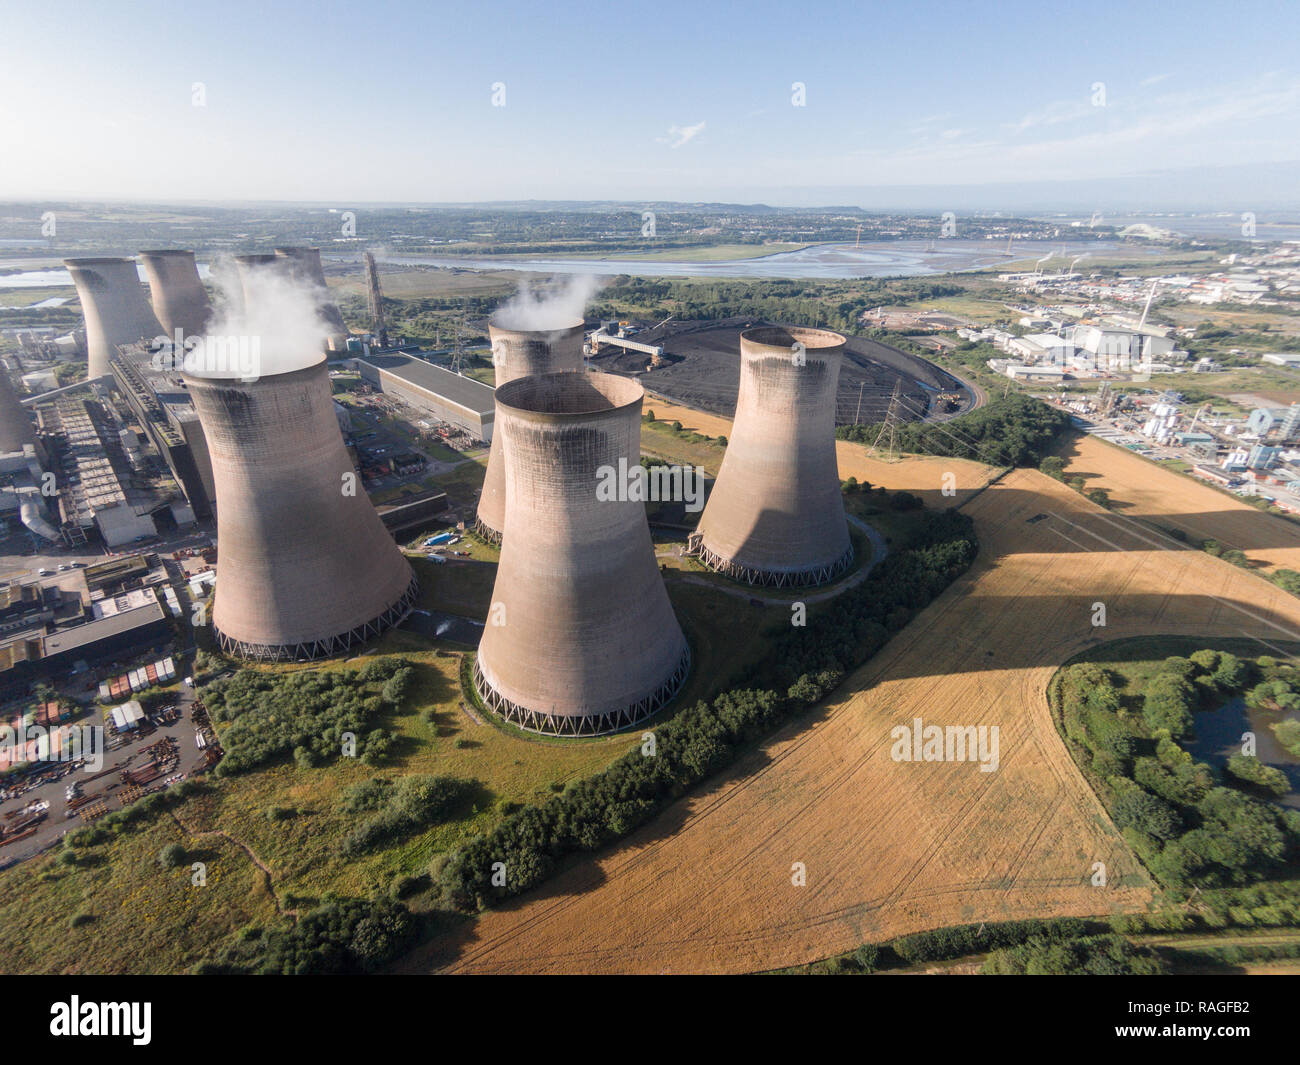 Aerial photographs of Fiddlers Ferry Power Station in Widnes / Sankey.  A Coal Power Station which famously lost a tower in 1984 due to high wind. Stock Photo